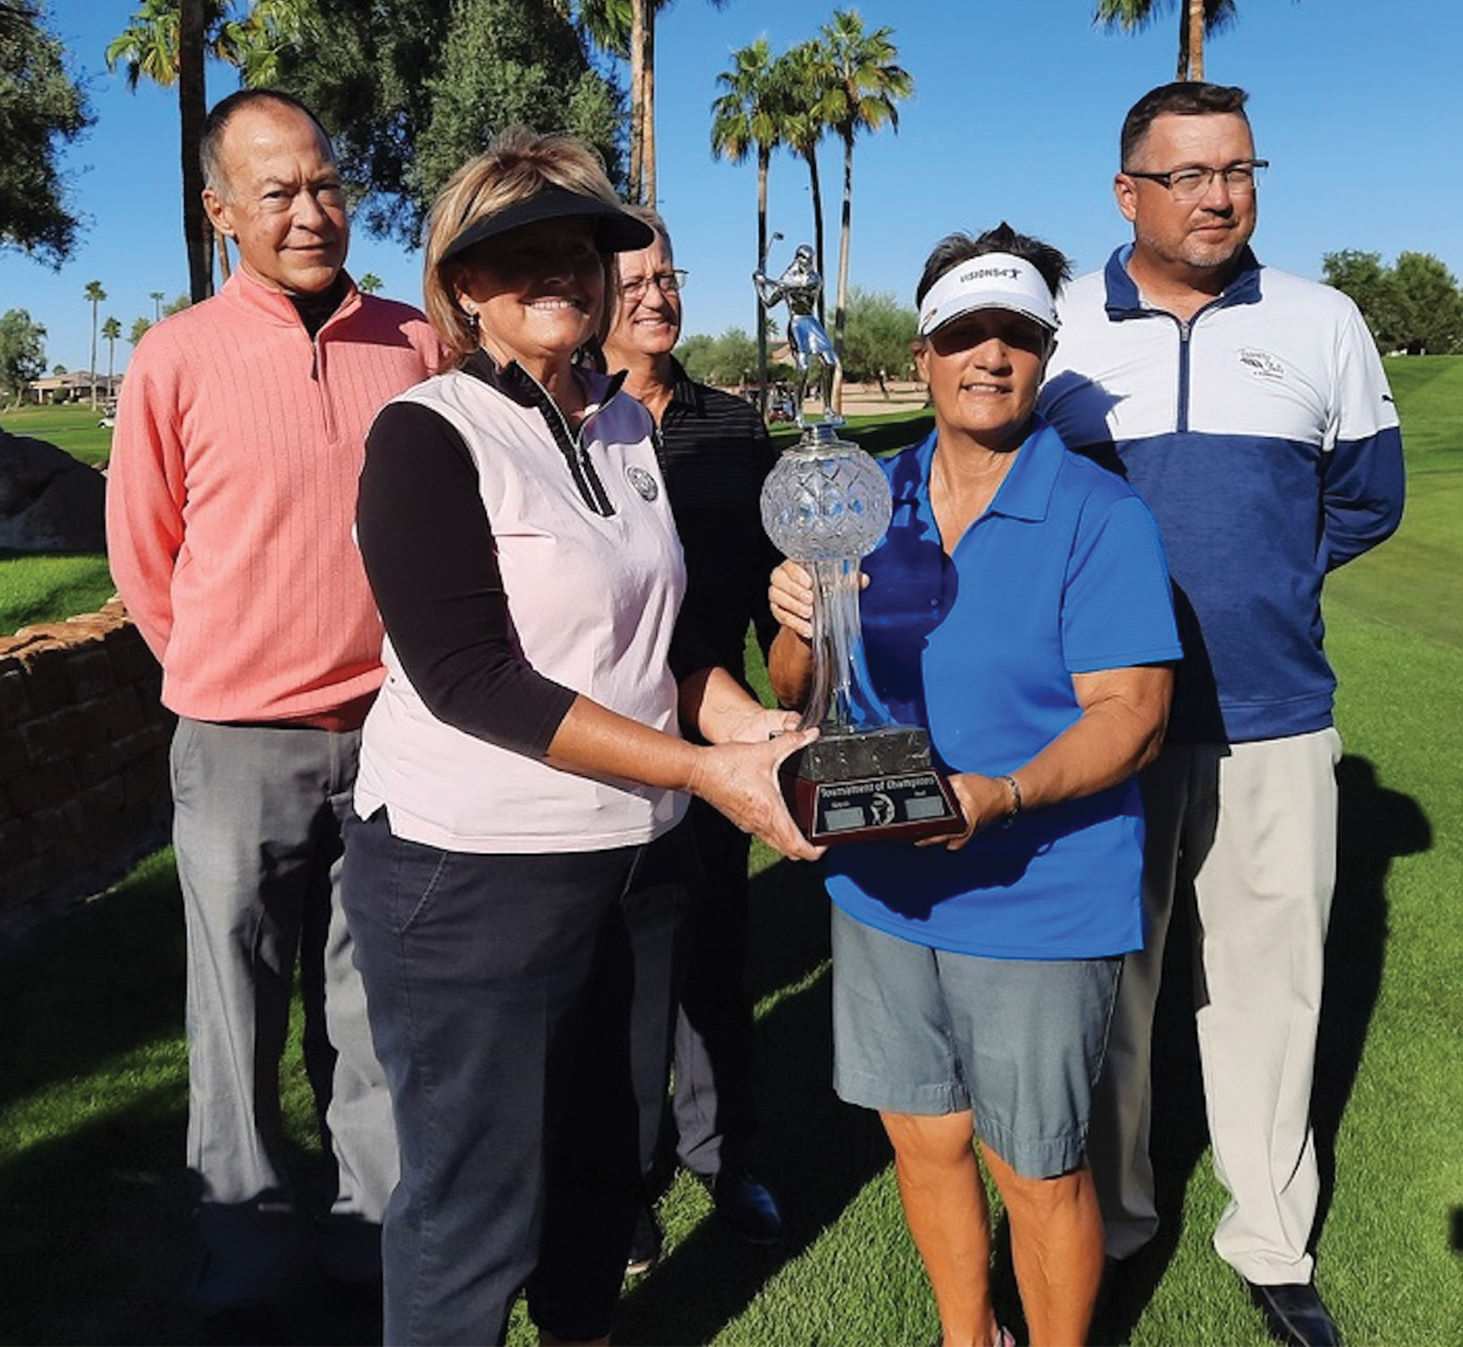 Front row (left to right): Overall Net Champion Nancy Moore and Overall Gross Champion Andrea Dilger; back row: Head Pro John McCahan, David Vader, and Ronnie Decker